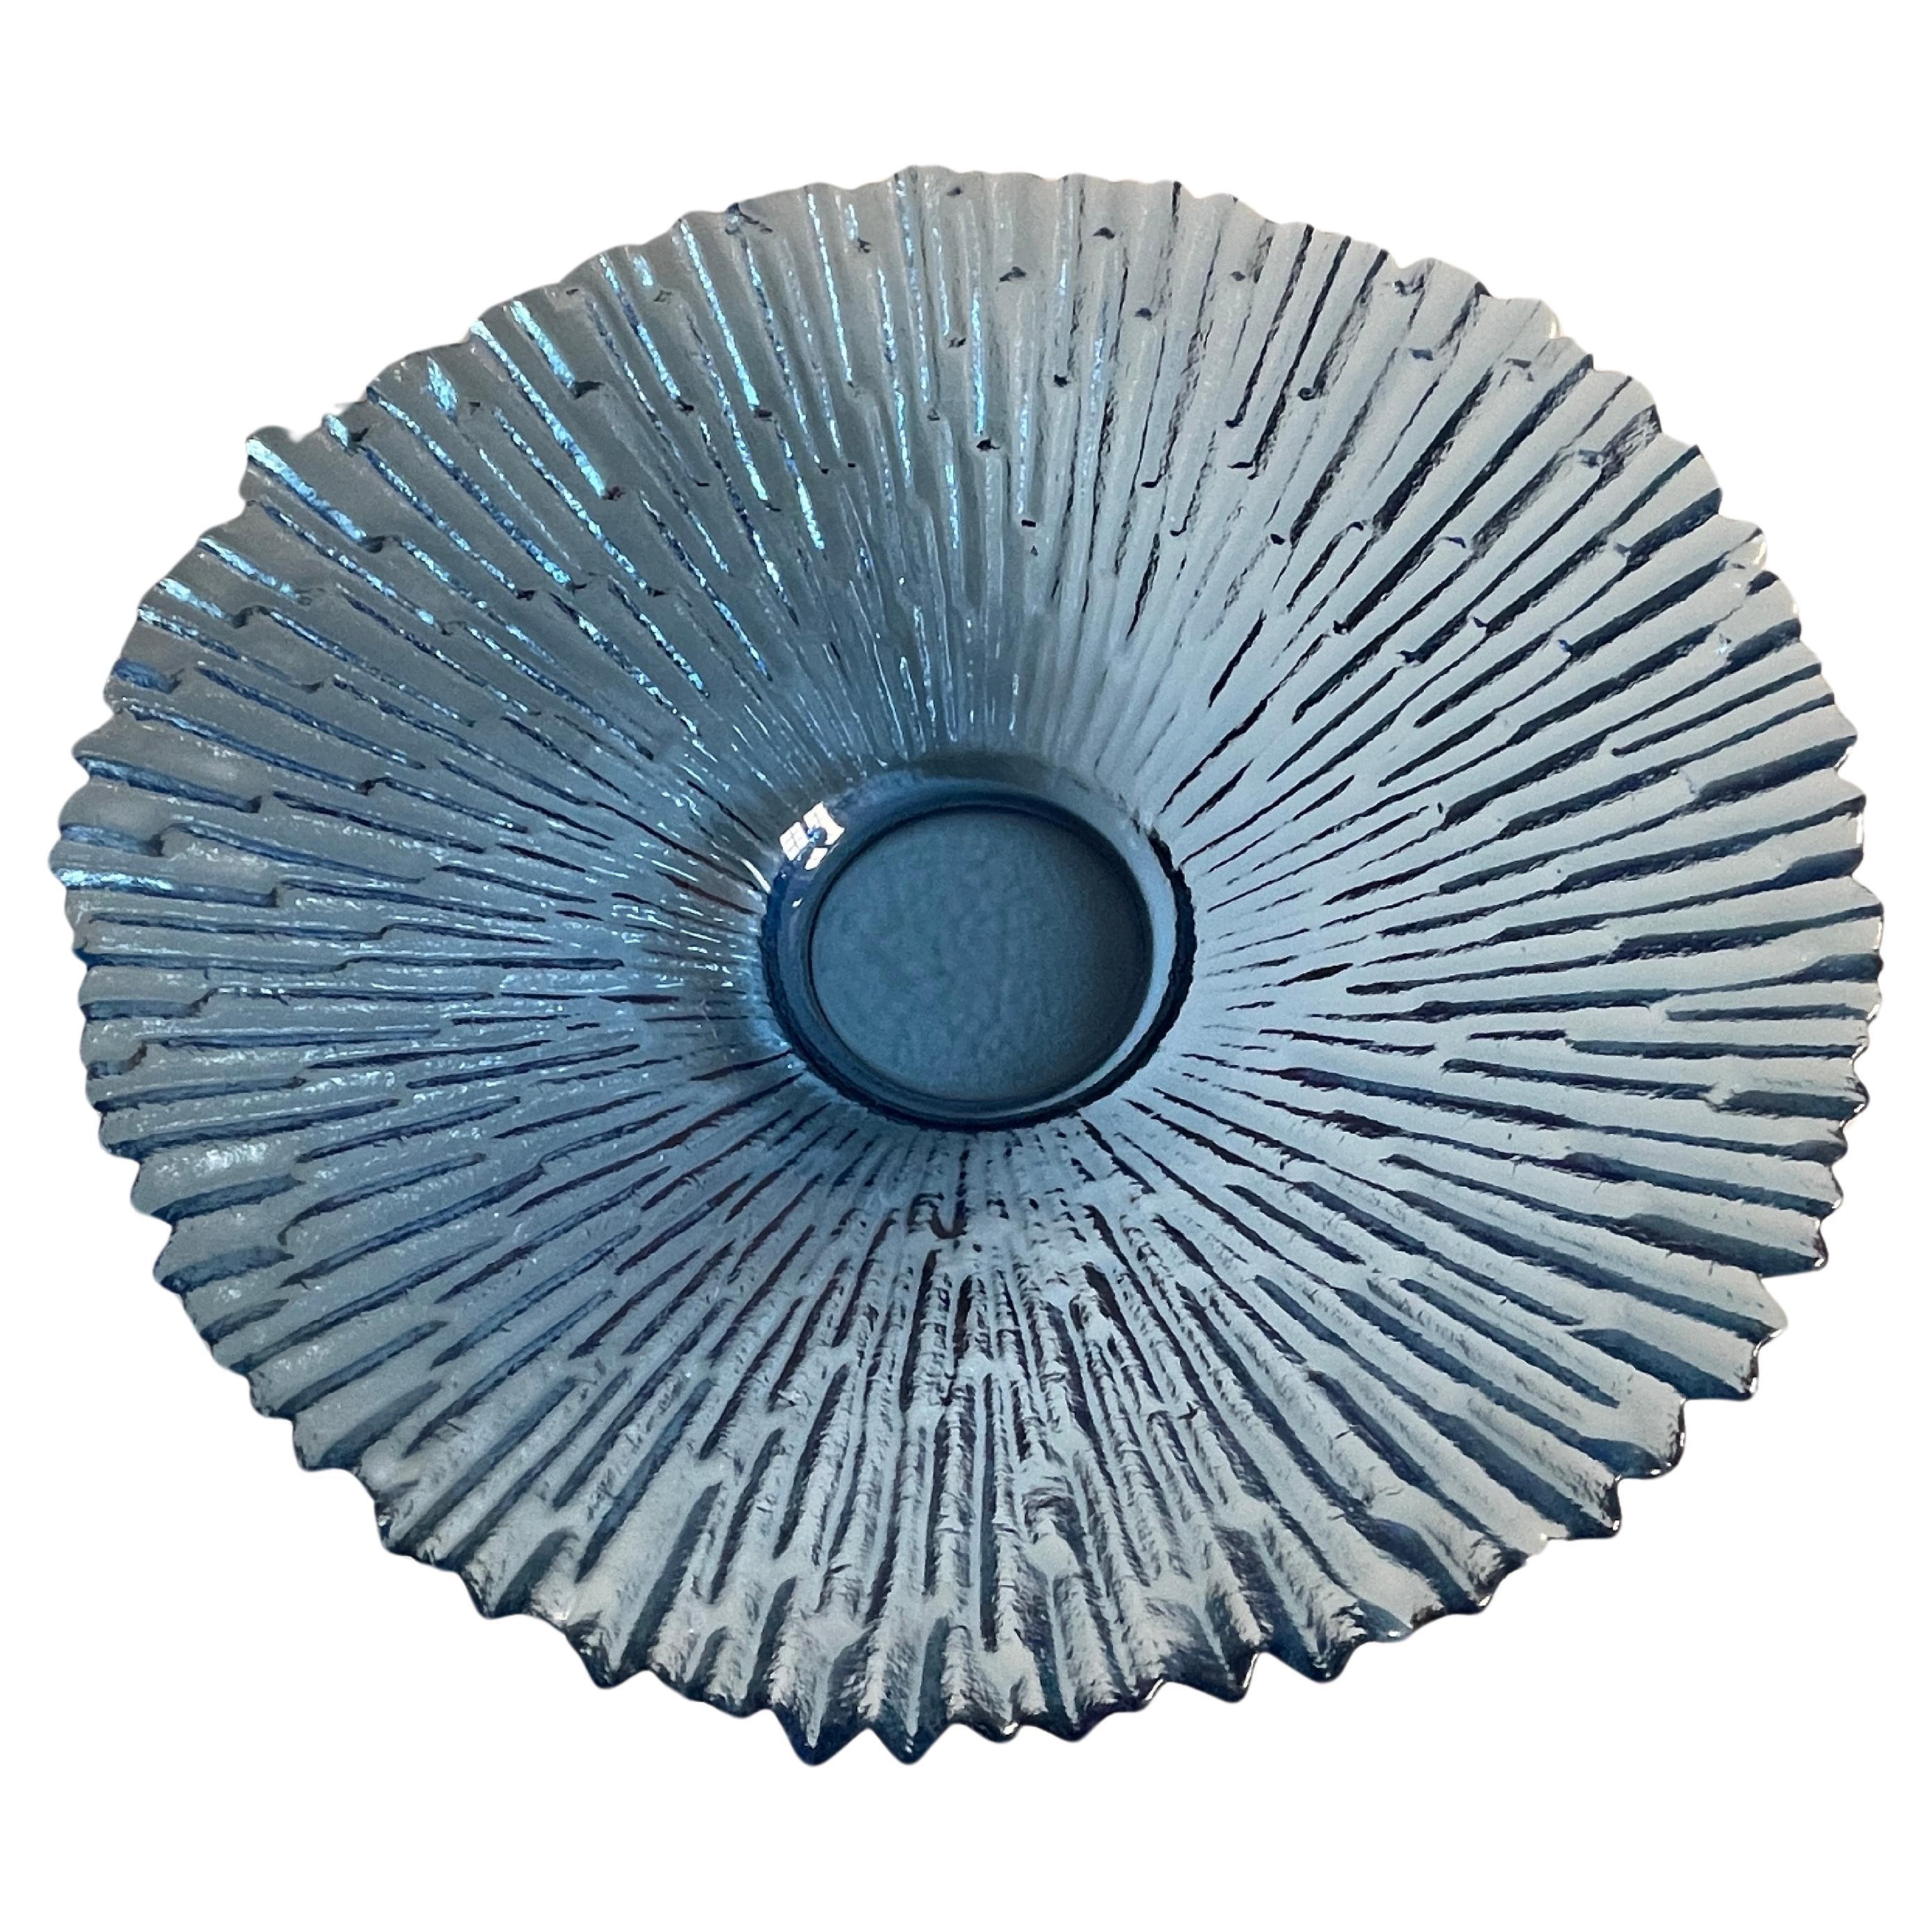  1970's Scandinavian blue glass icicle centrepiece bowl, designed by Tauno Wirkkala, Finland. The bowl has a wonderful translucent  quality as the light comes through. Hand made in a centrifugal mold., then the interior has been highly polished by